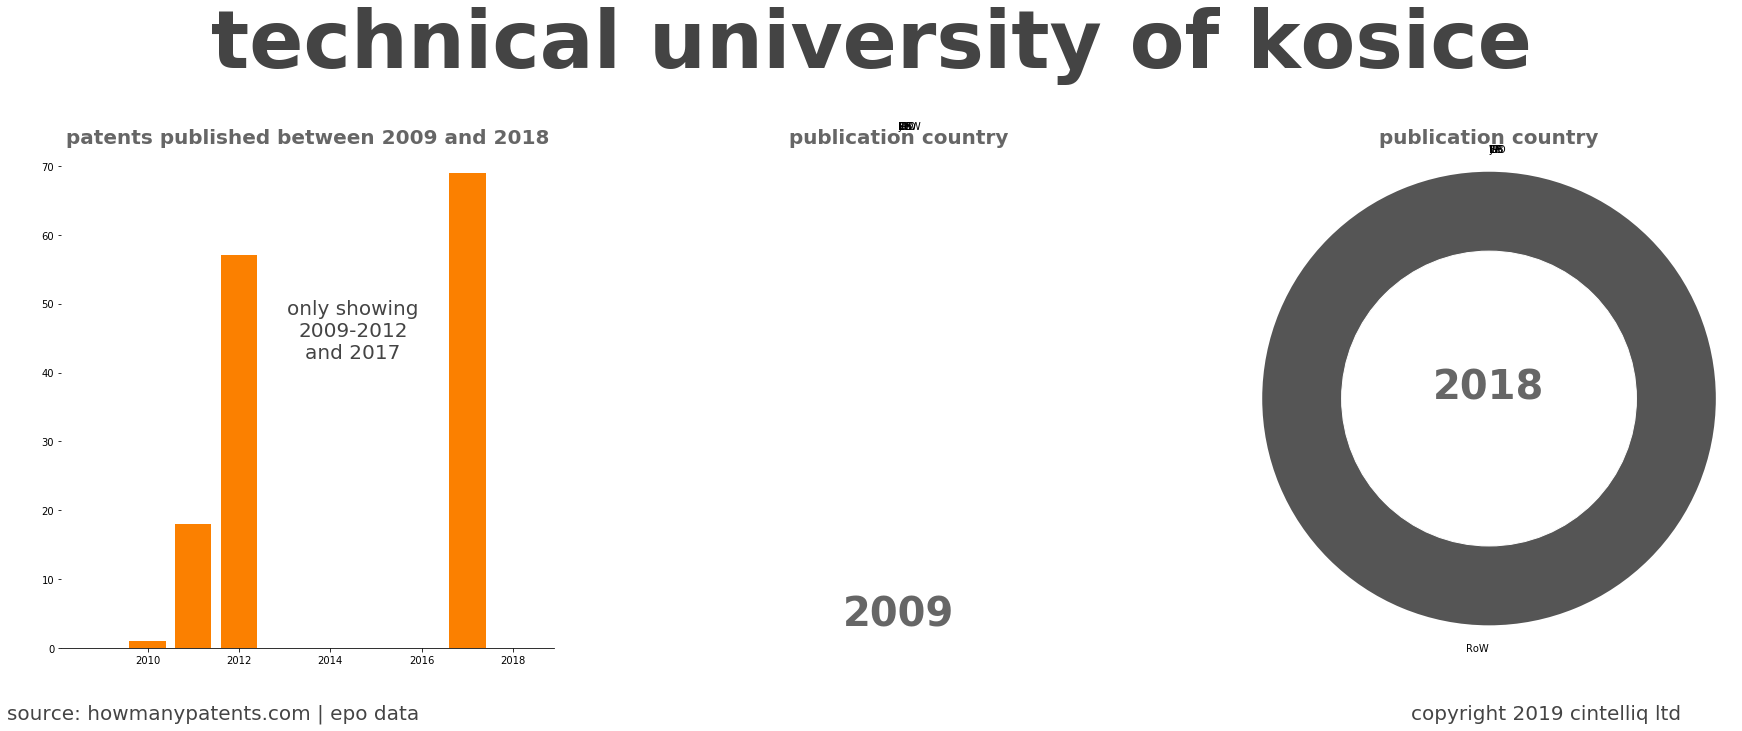 summary of patents for Technical University Of Kosice